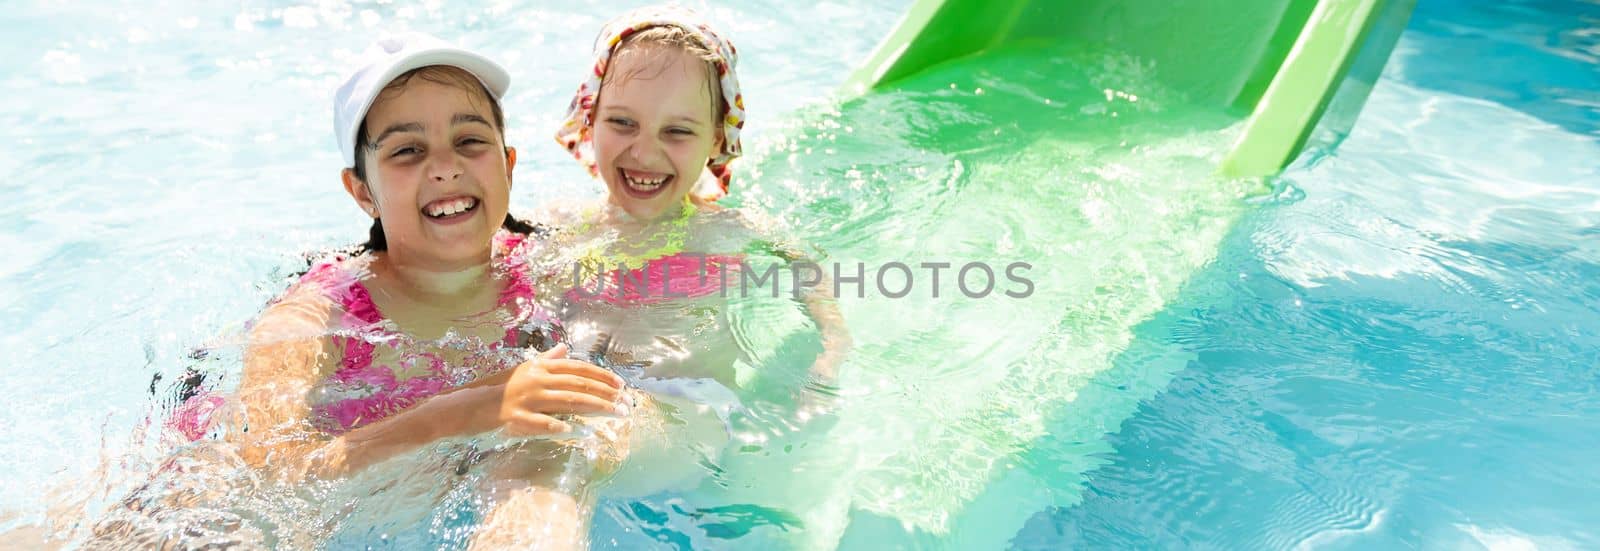 Happy children in the swimming pool. Funny kids playing outdoors. Summer vacation concept. by Andelov13